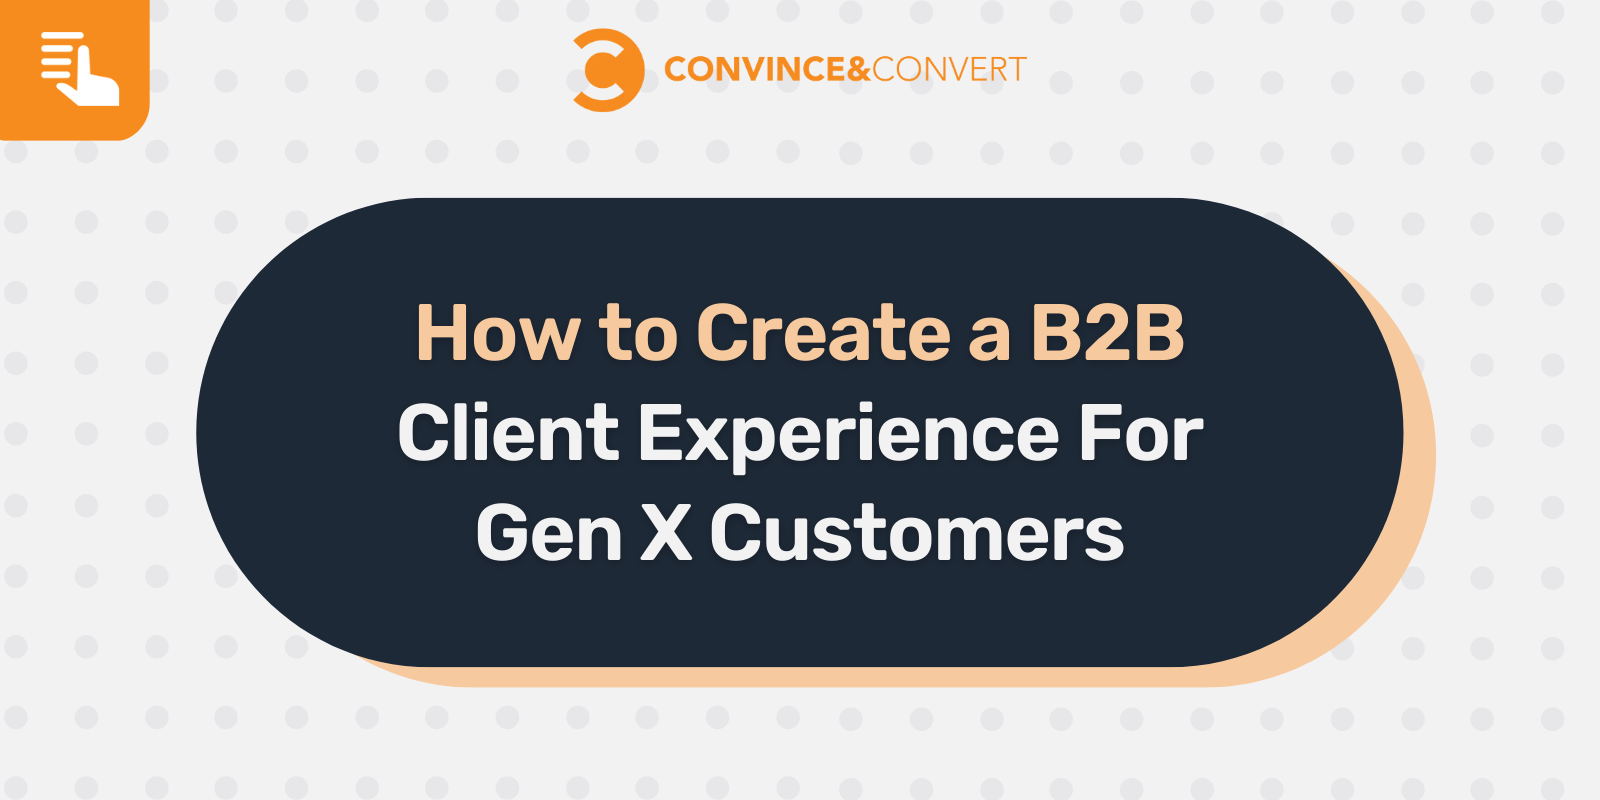 You are currently viewing How to Create a B2B Client Experience For Gen X Customers